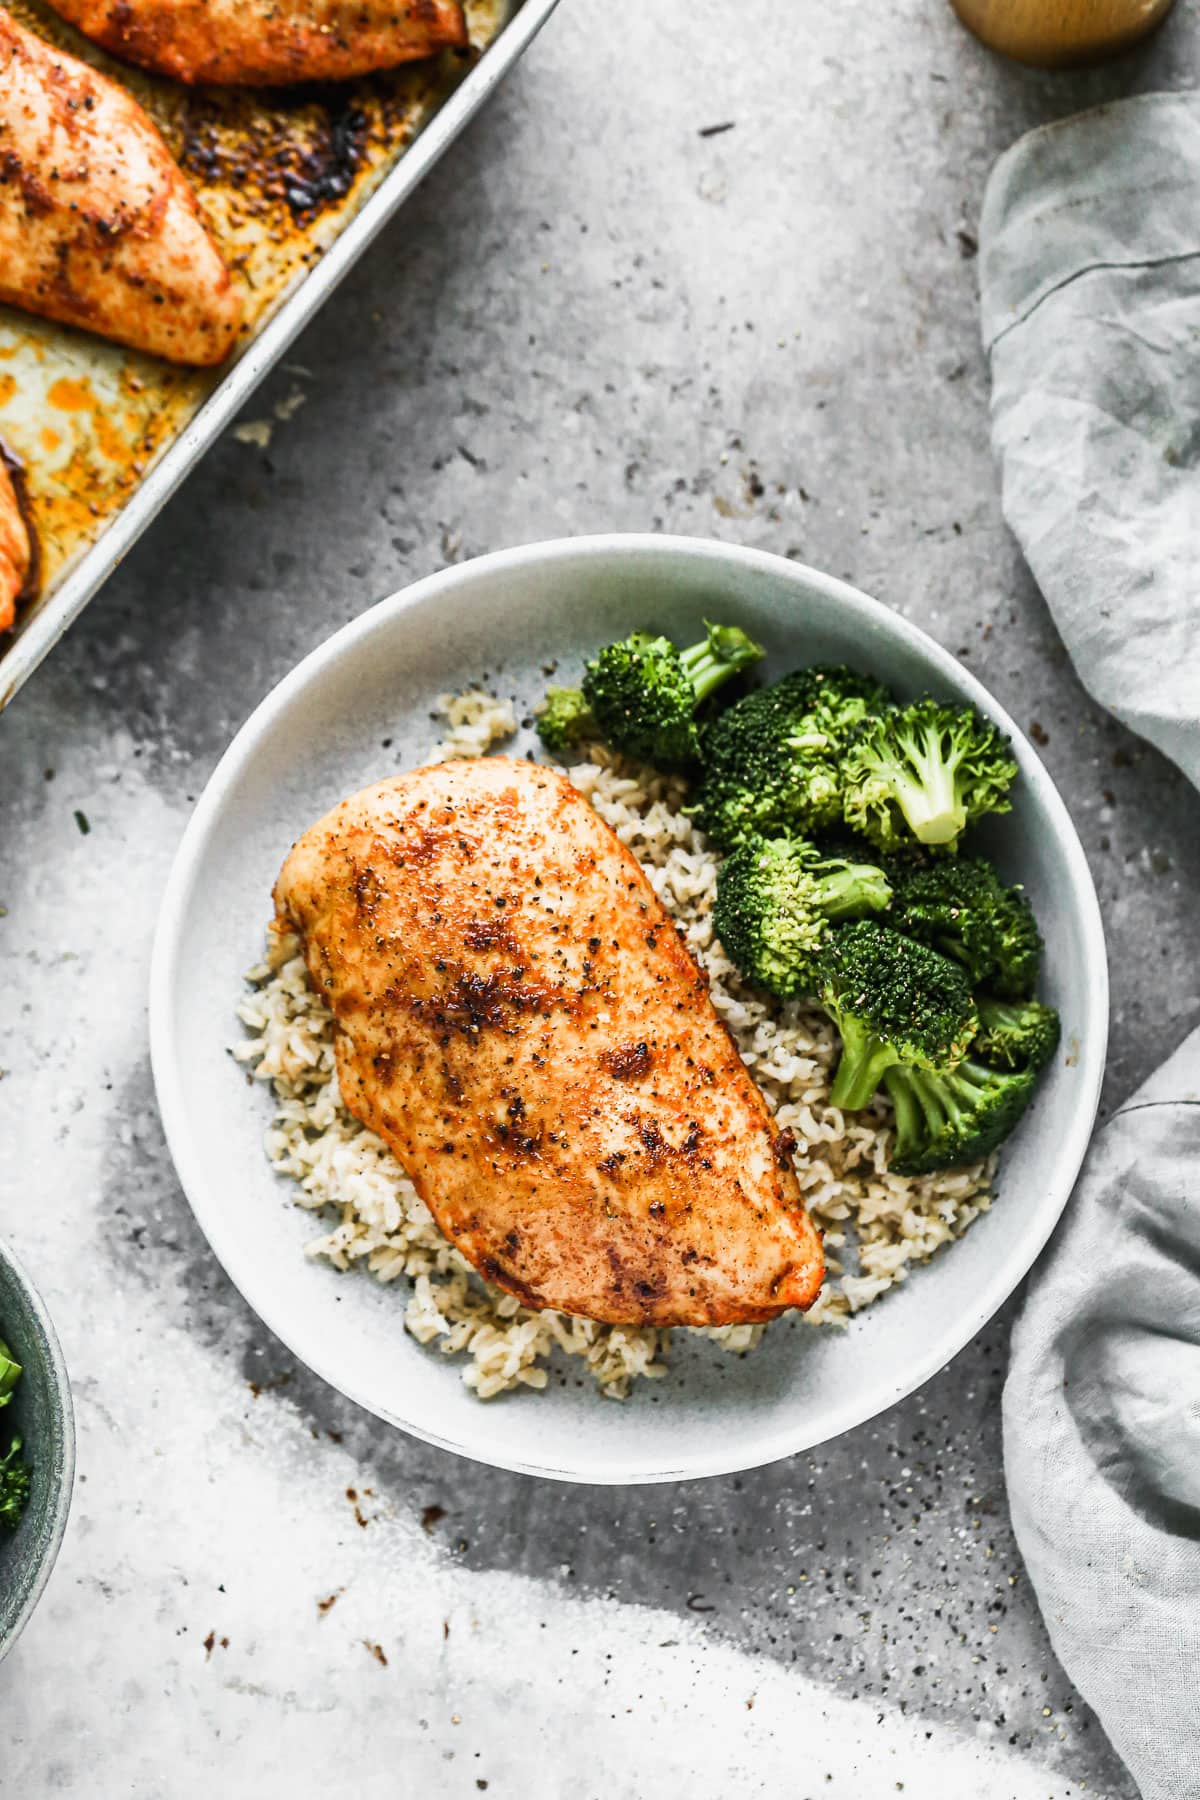 Oven roasted chicken breast in a bowl with rice and broccoli